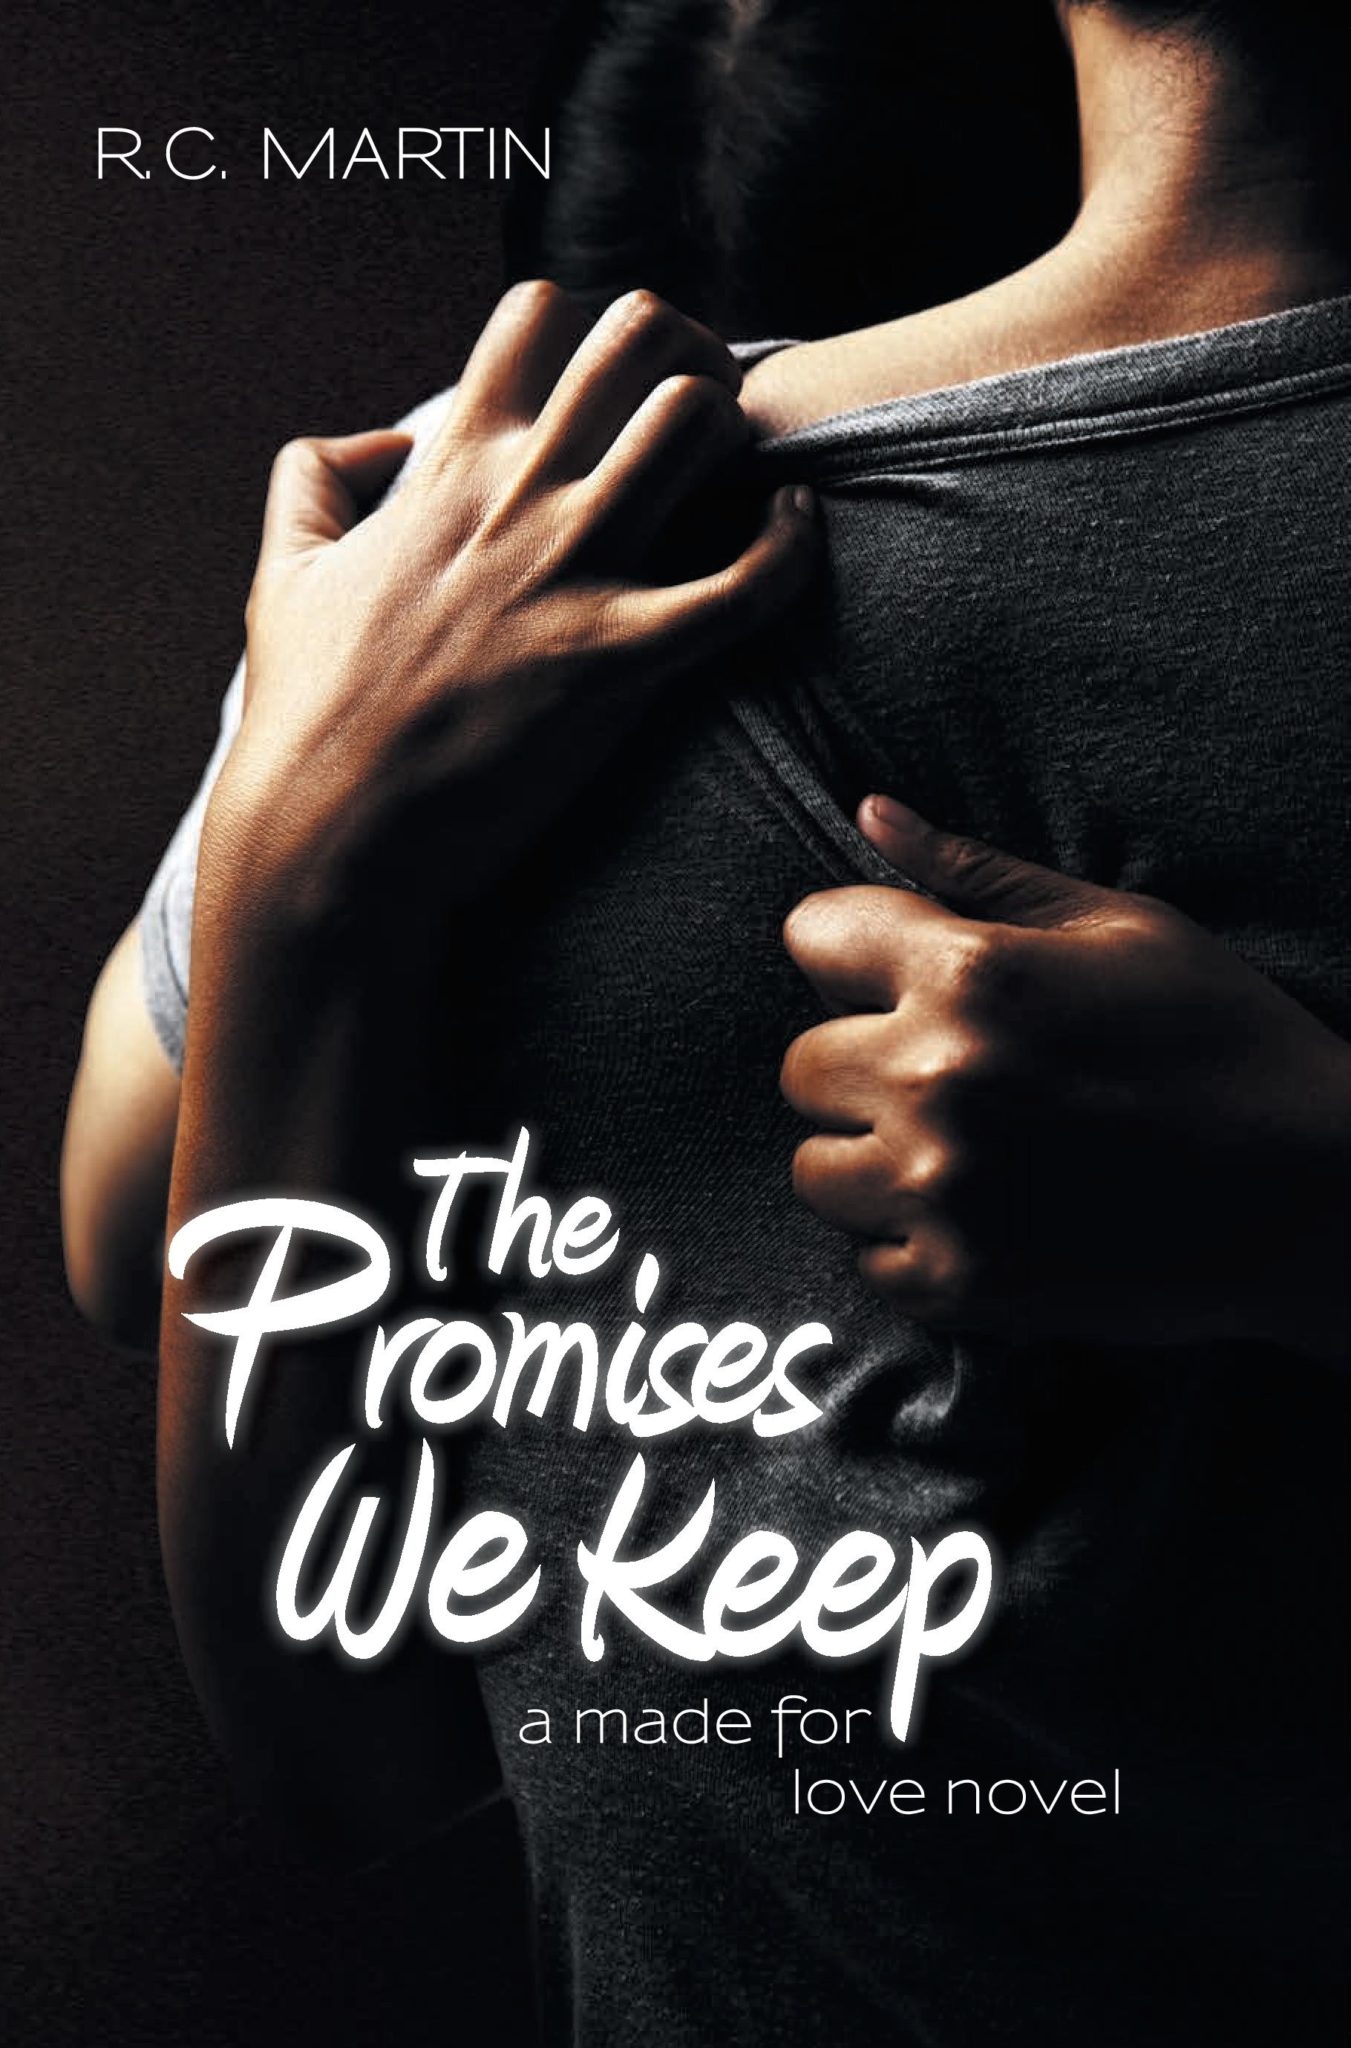 The Promises We Keep by R.C. Martin